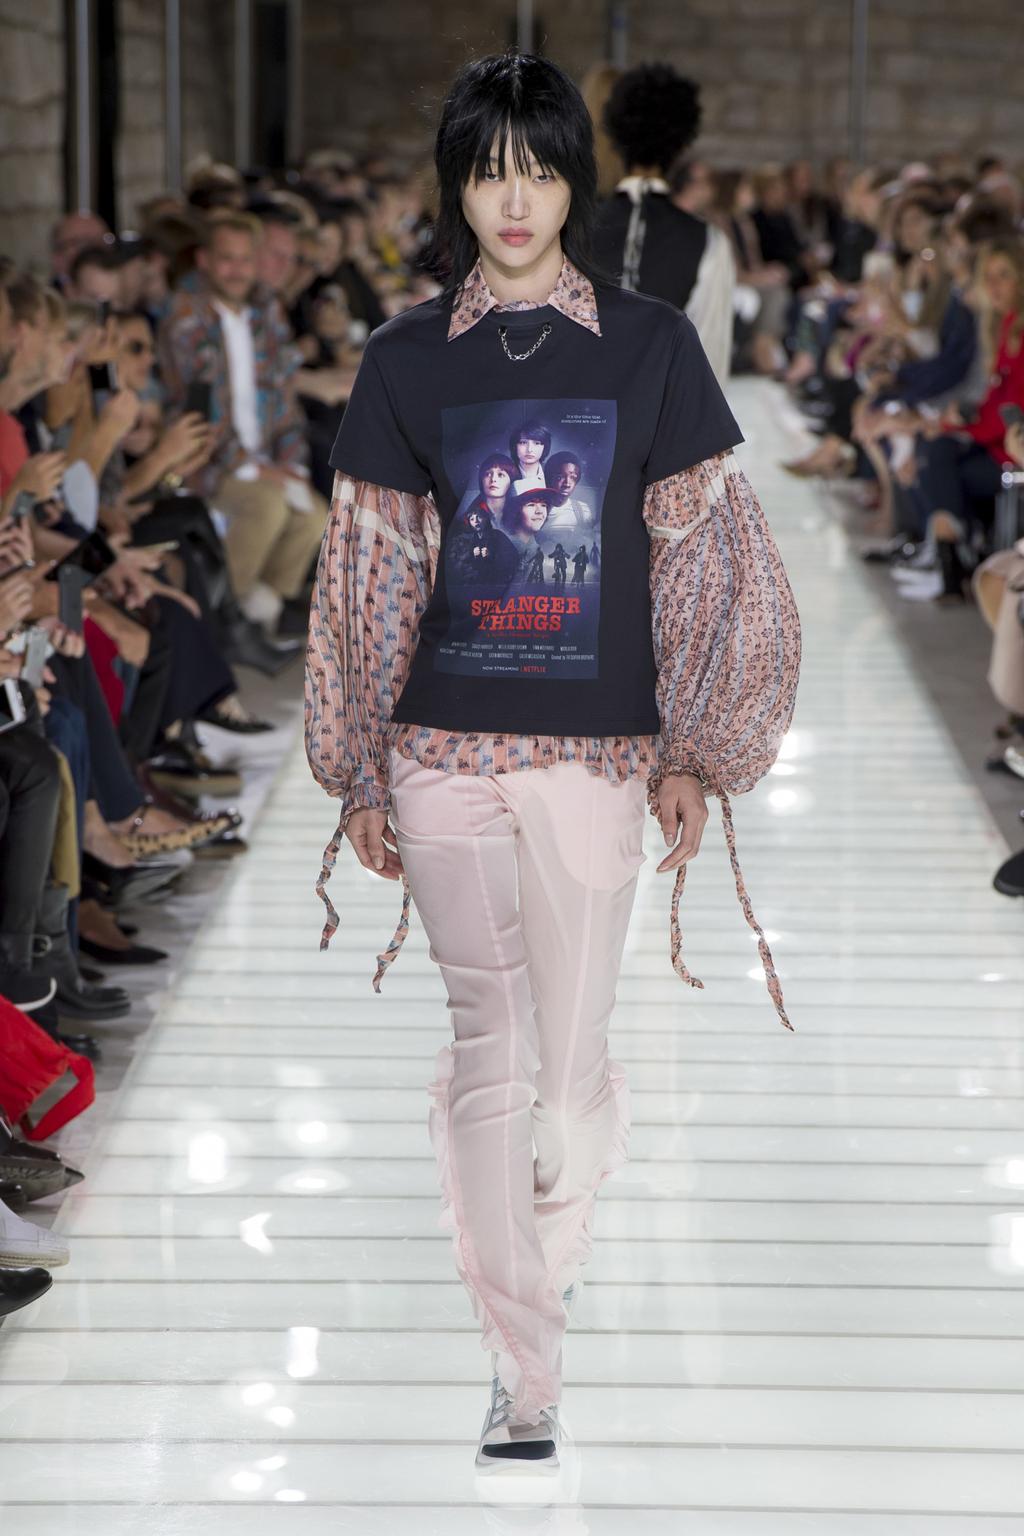 Louis Vuitton Are Stranger Things Fans Too Release T Shirt To